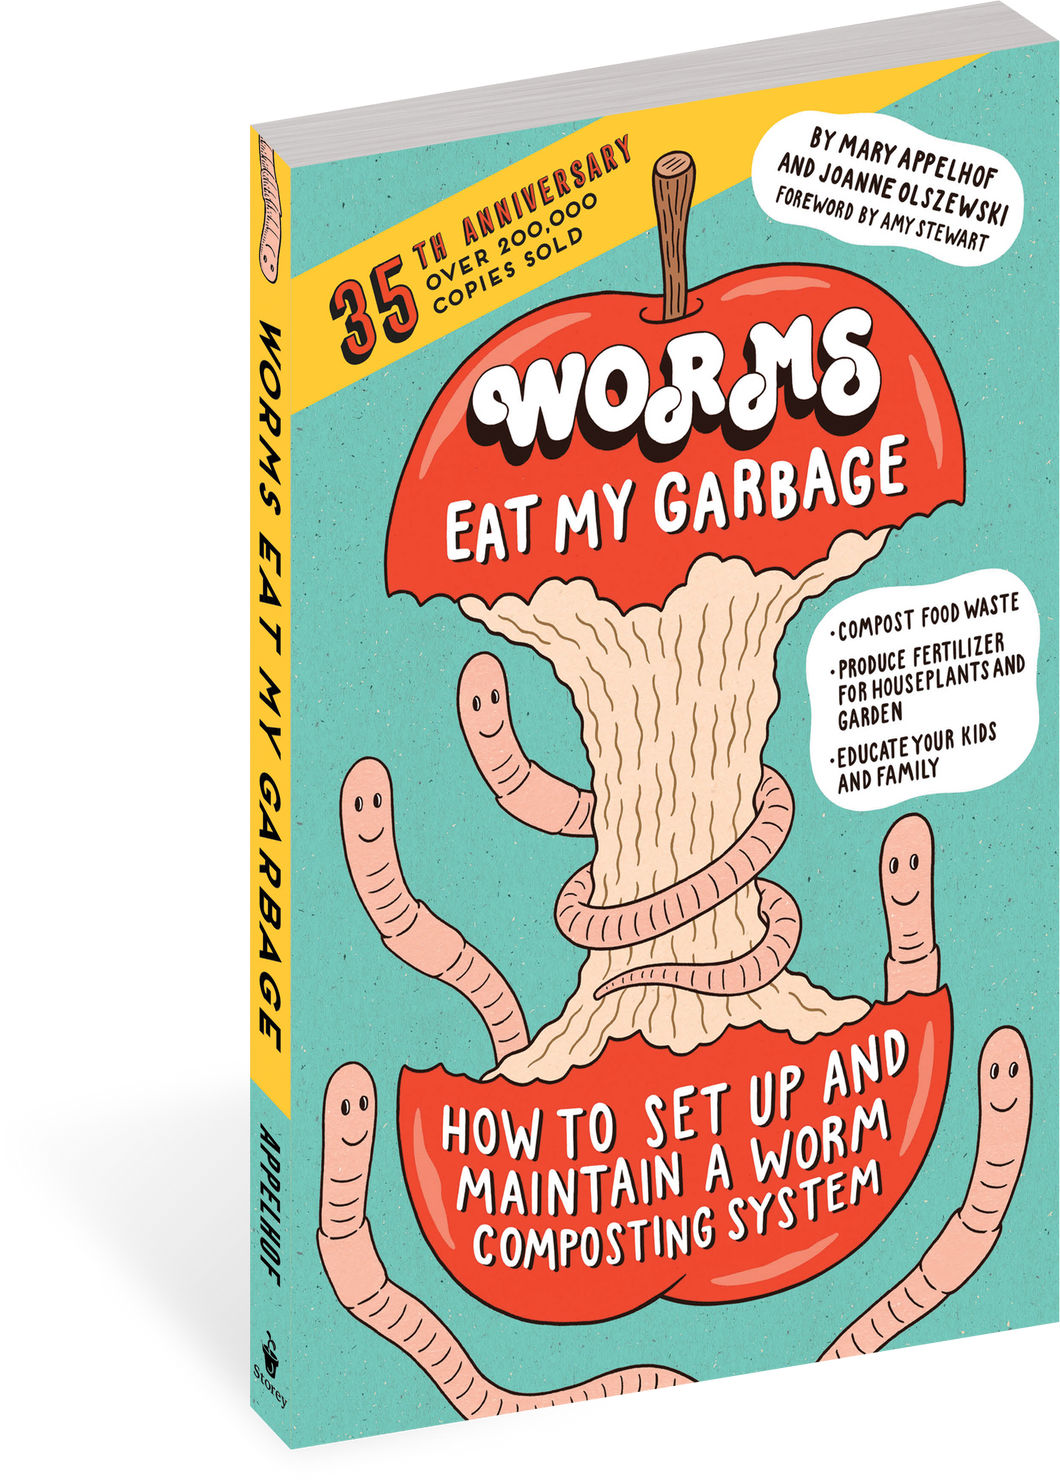 WORMS EAT MY GARBAGE-35TH Anniversary